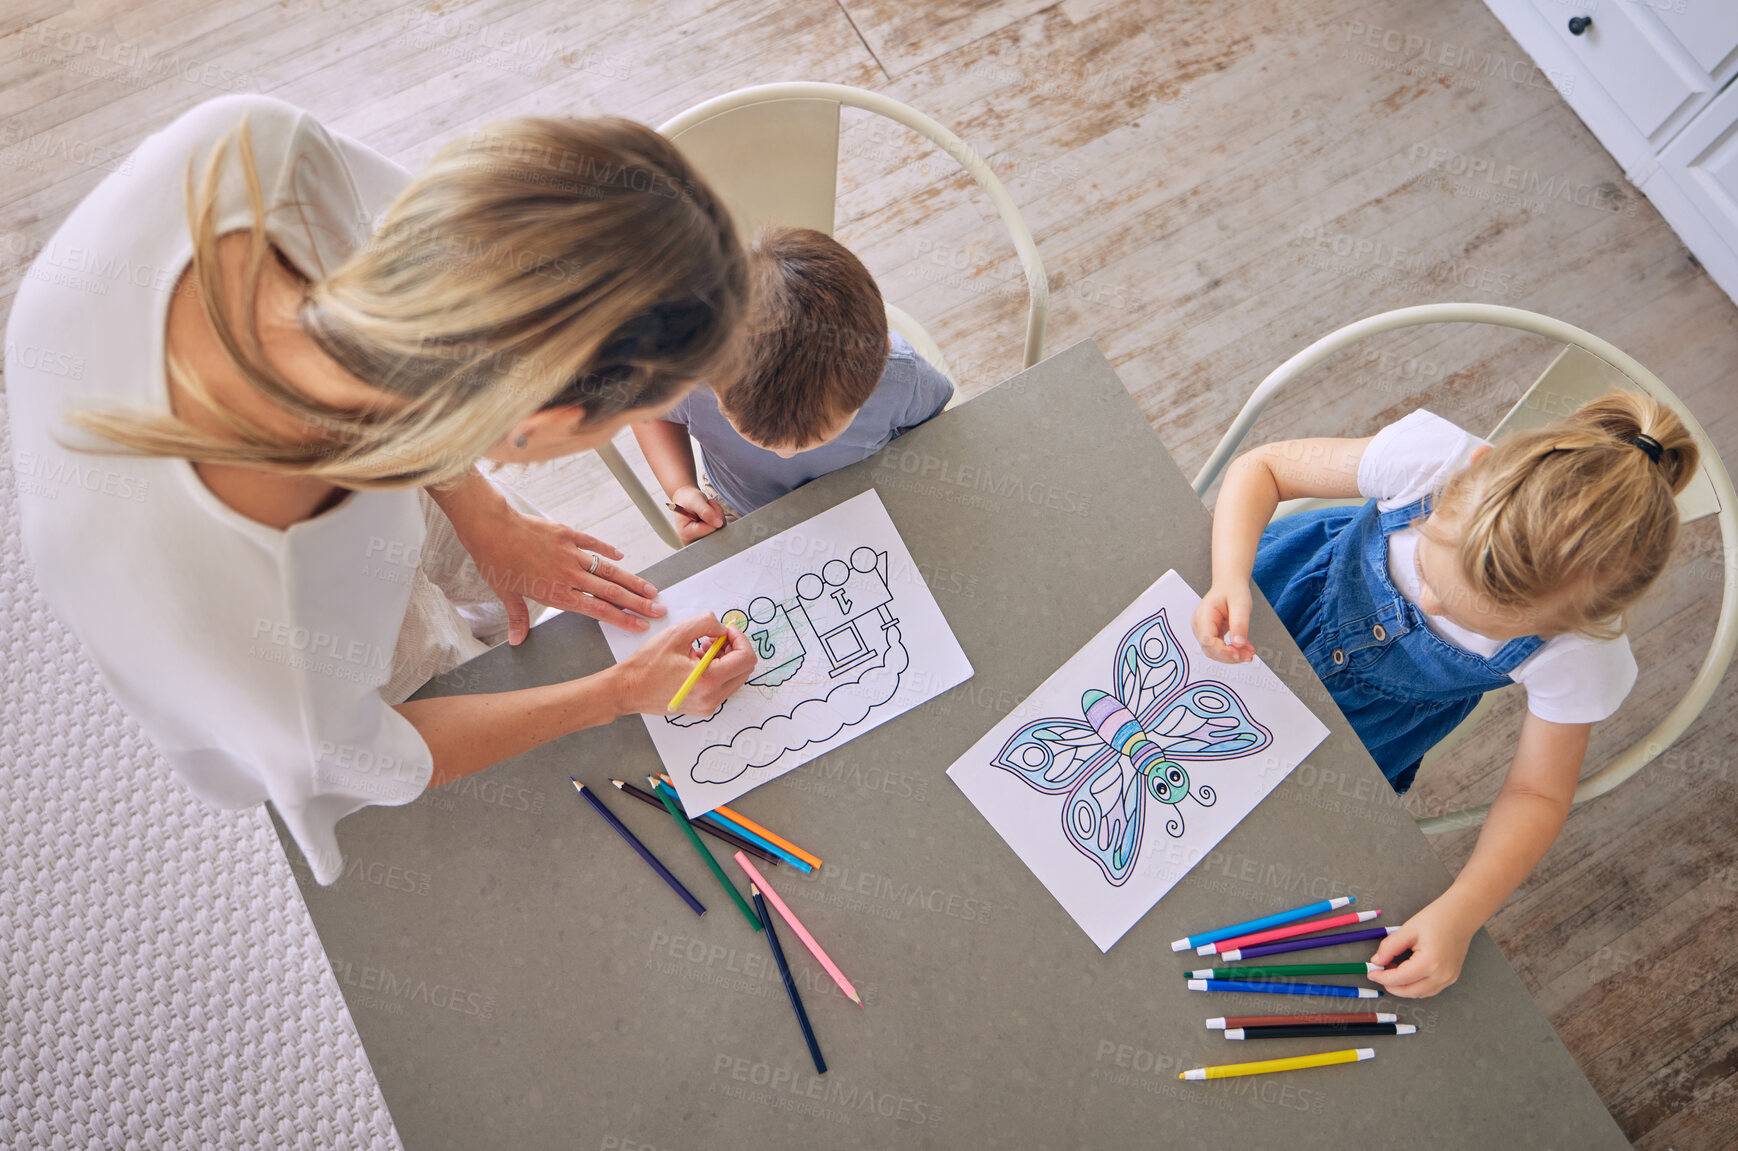 Buy stock photo Above shot of little girl and boy sitting at table with colourful pencils and pictures while colouring with mom helping. Caucasian mother with two kids enjoying educational pastime and being creative